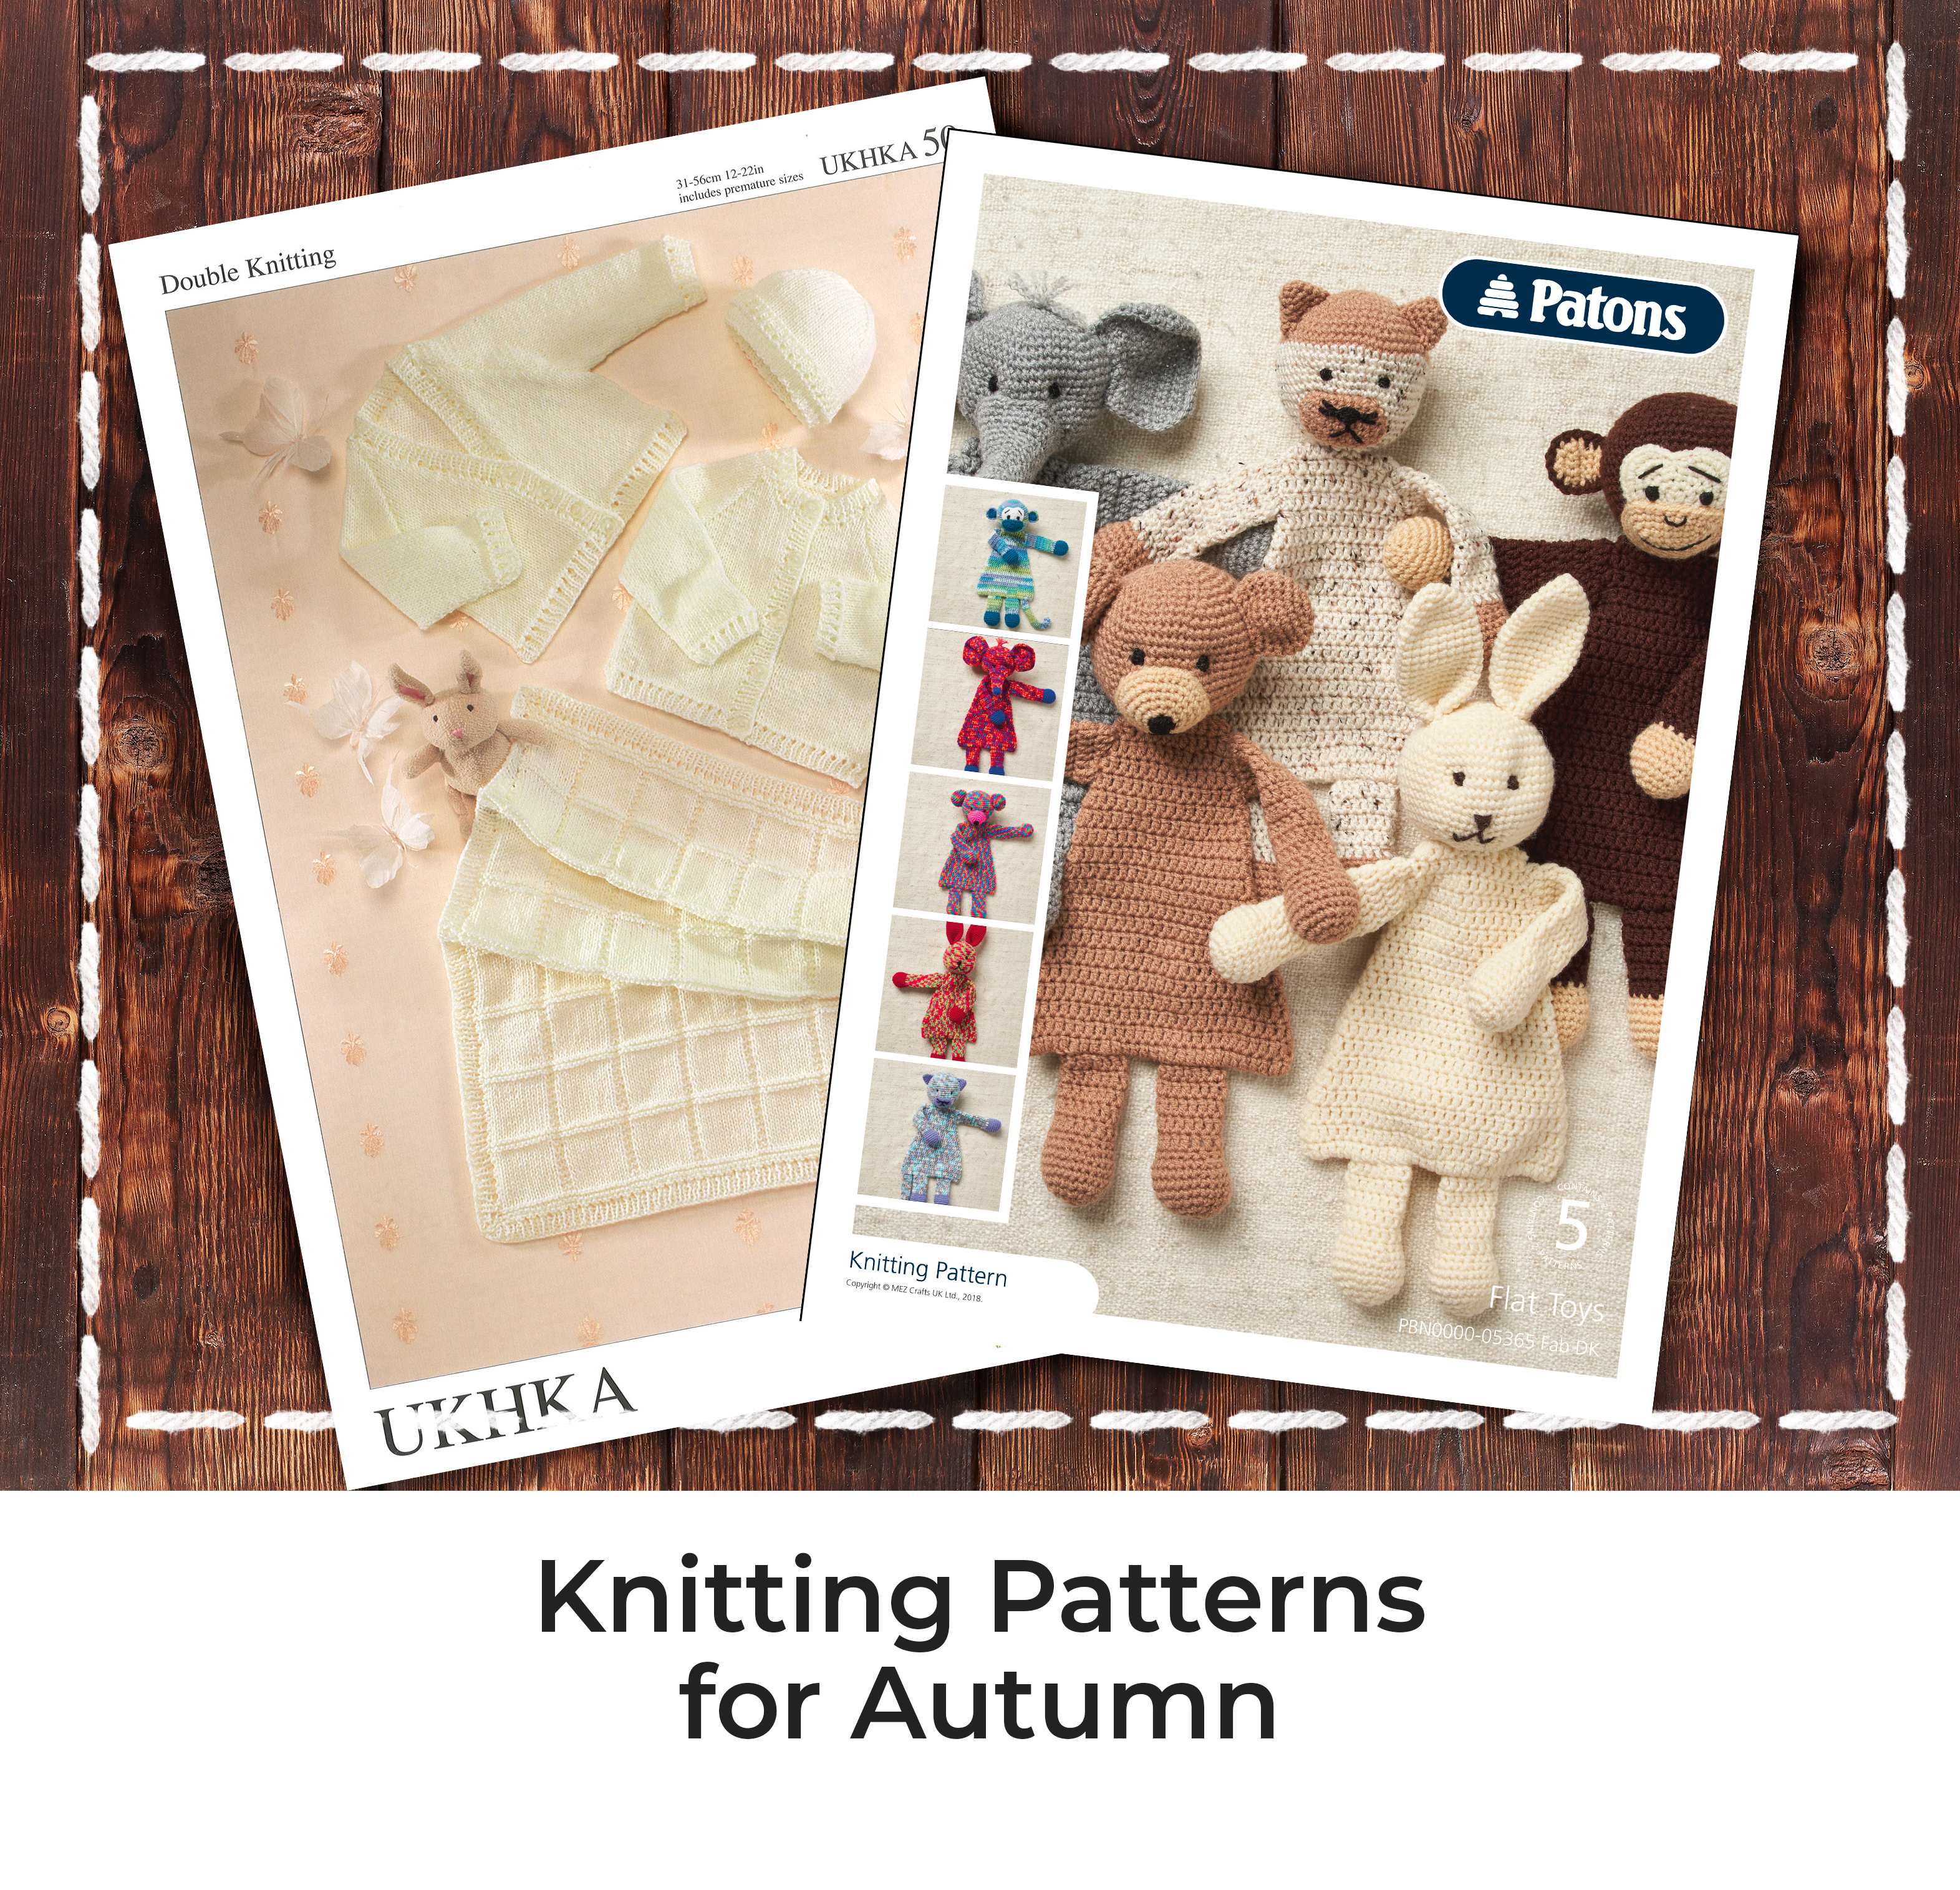 Knitting Patterns for Autumn